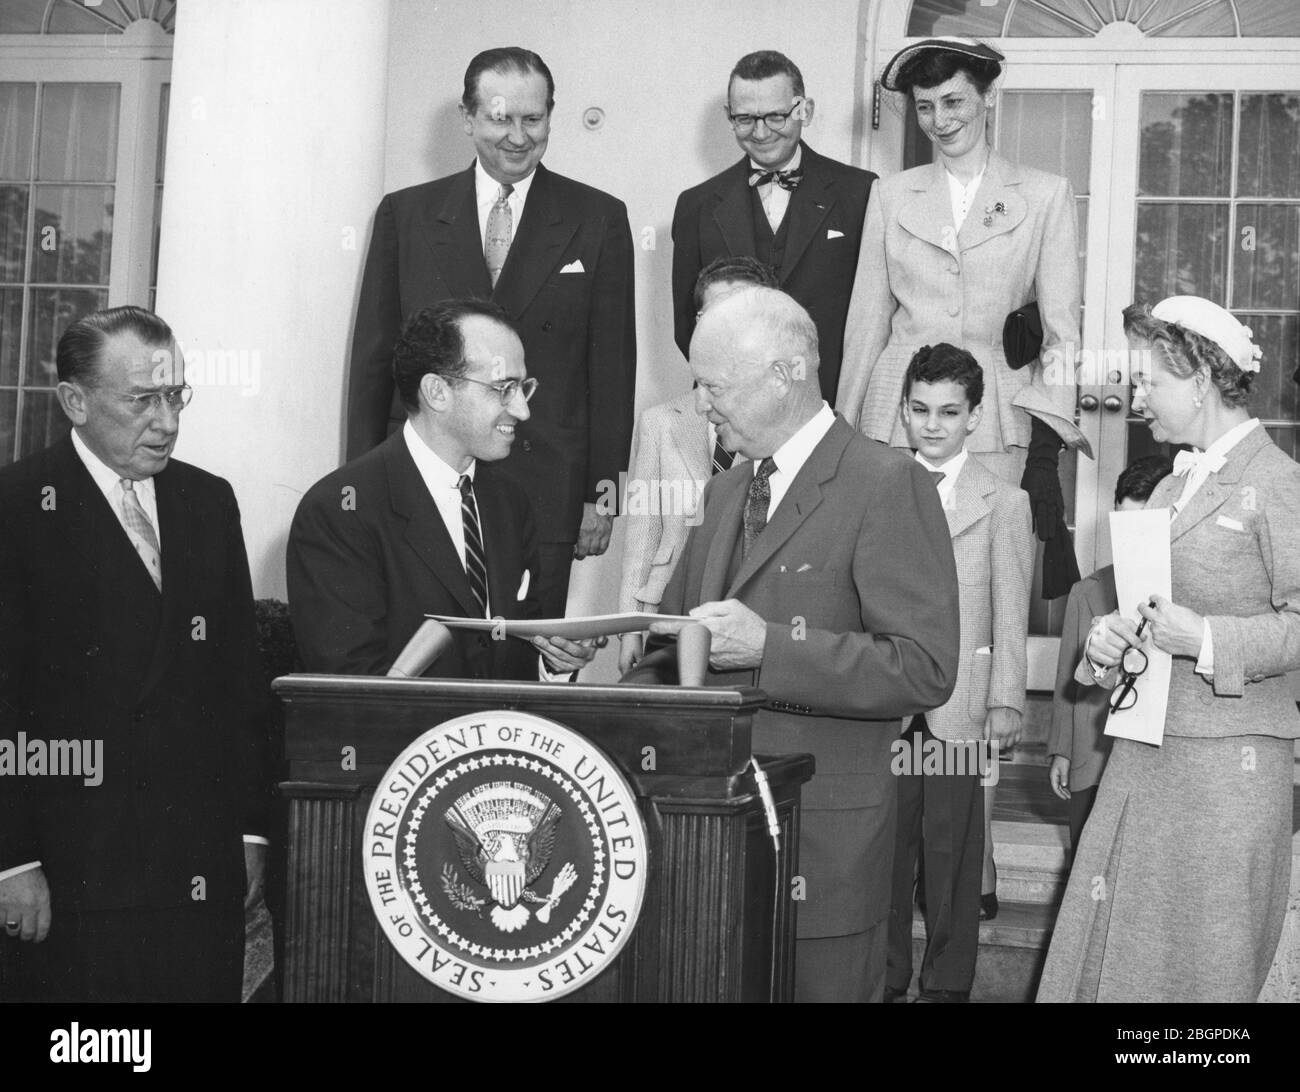 Dr Jonas Salk Second From The Left University Of Pittsburgh Scientist Who Discovered The Anti Polio Vaccine Receives A Special Citation From President Eisenhower At The White House 1955 Stock Photo Alamy